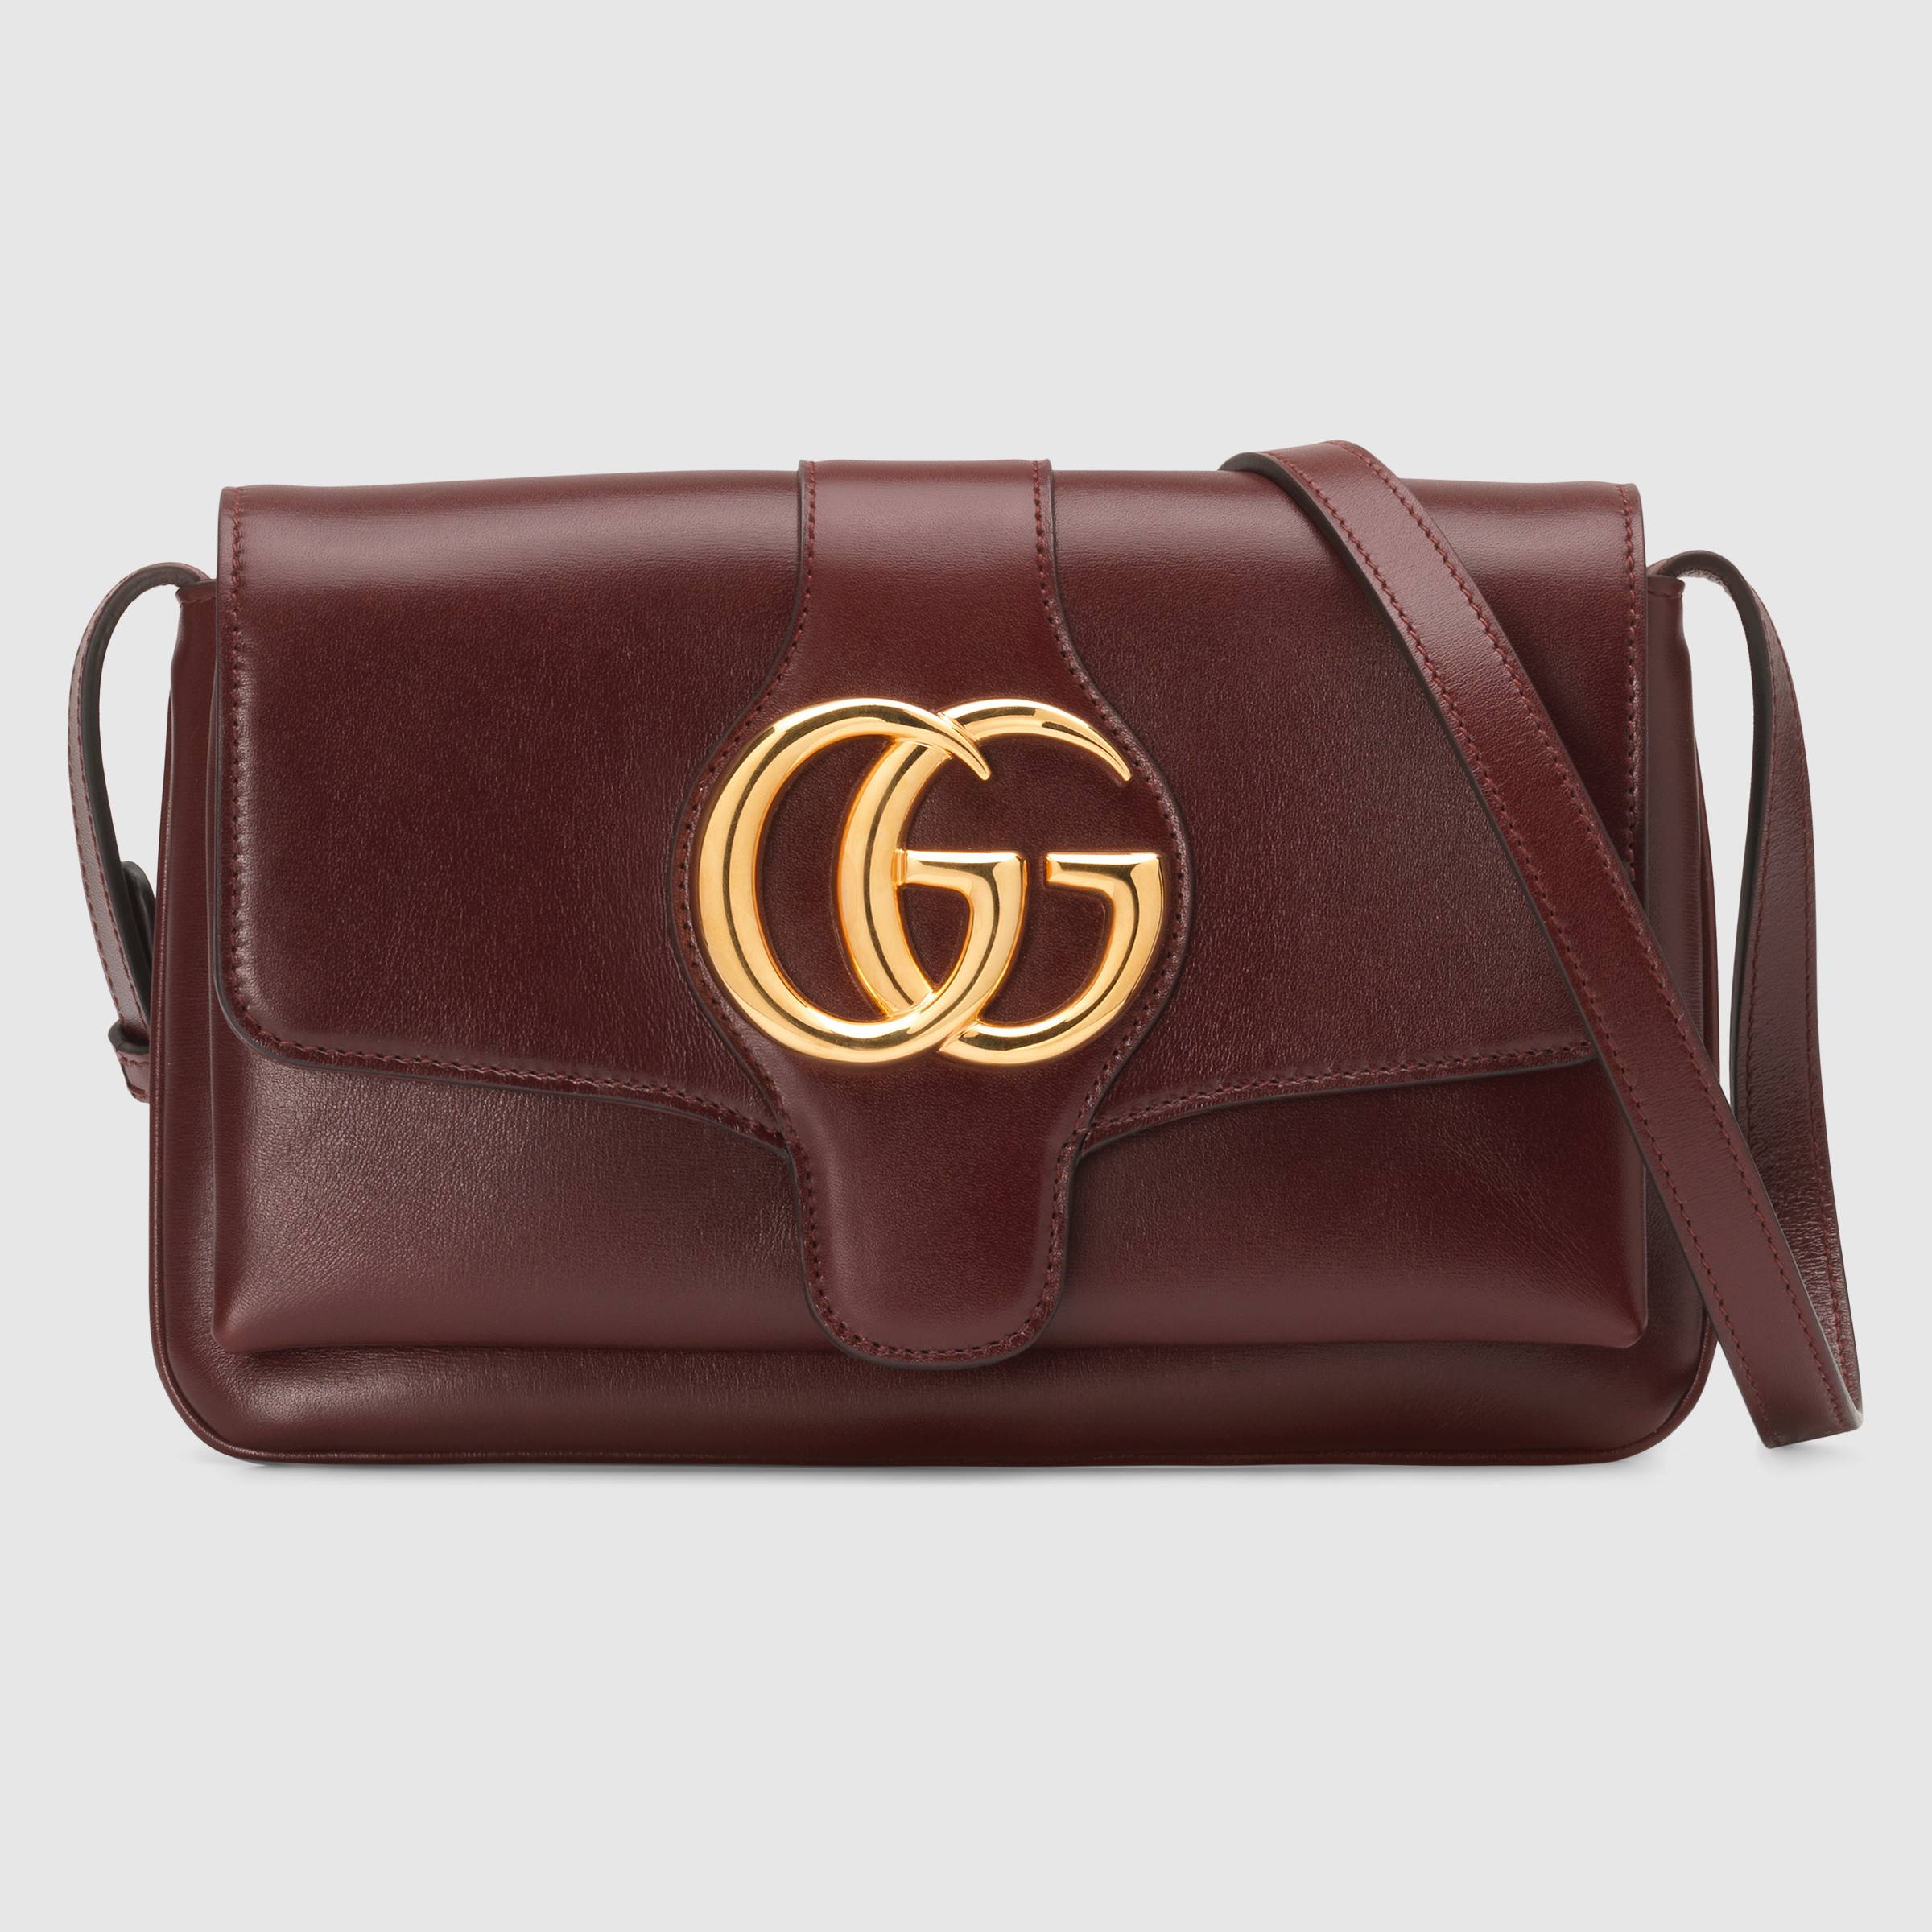 12 Must Have Gucci Bags For 2019 